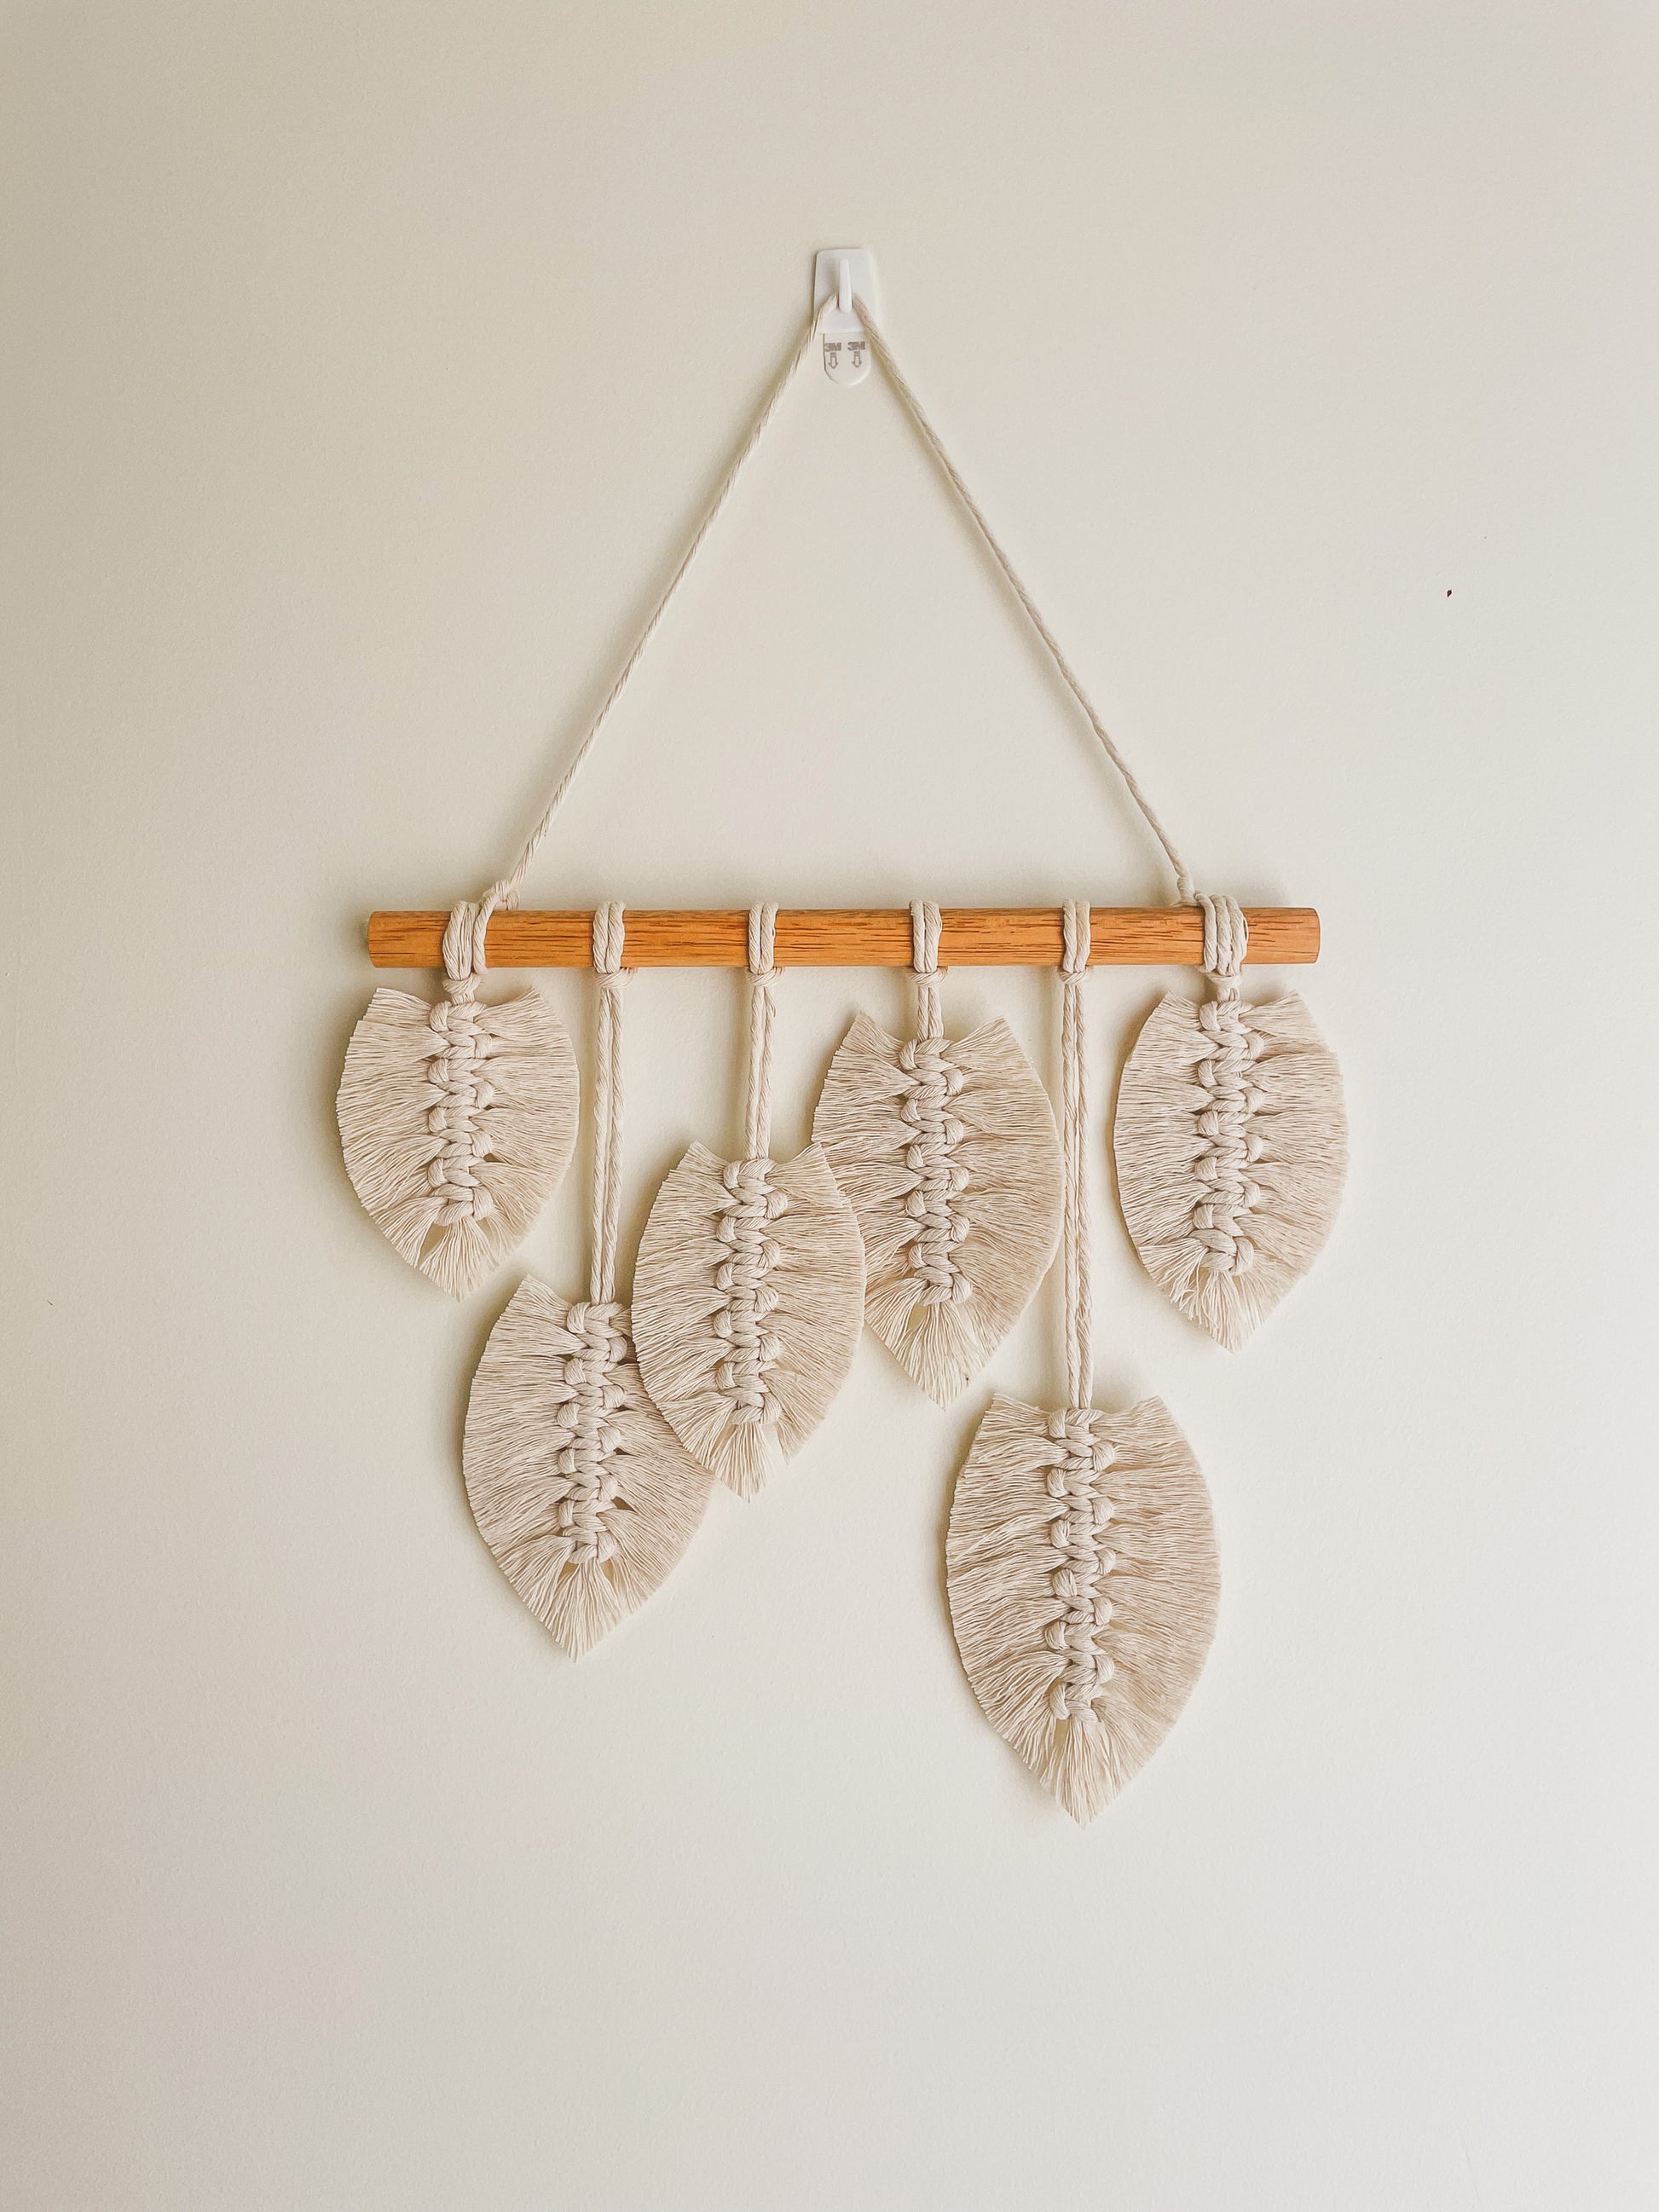 Close up view of Sunshine macrame leaves hanging hanged on a wall. Ceramic vase placed next to it with a dried branch from a tree